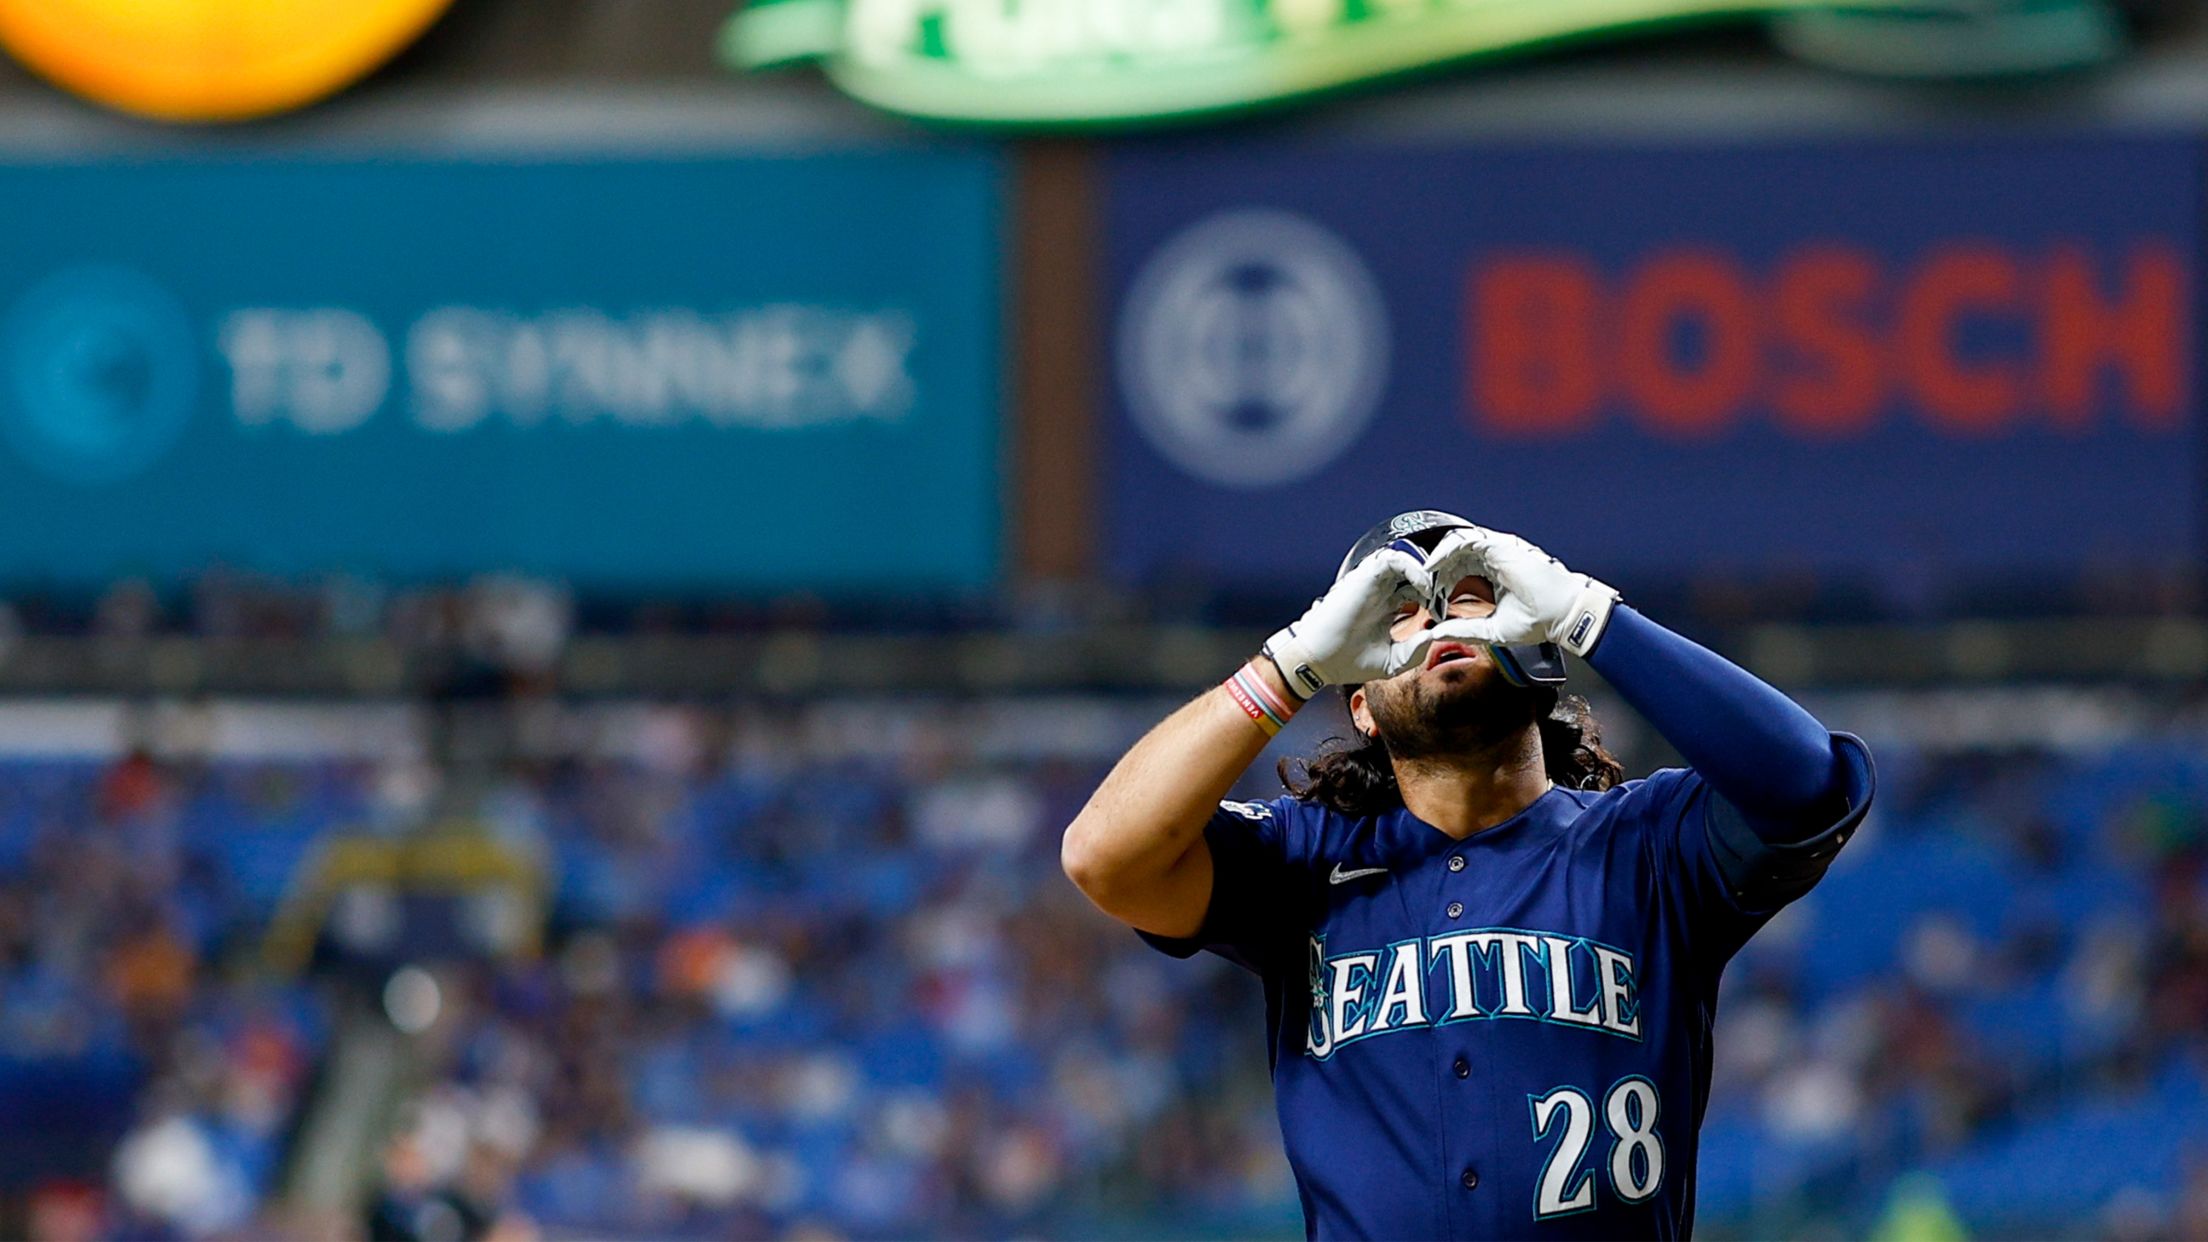 Mariners' new players embrace Seattle: 'Nothing but good vibes so far